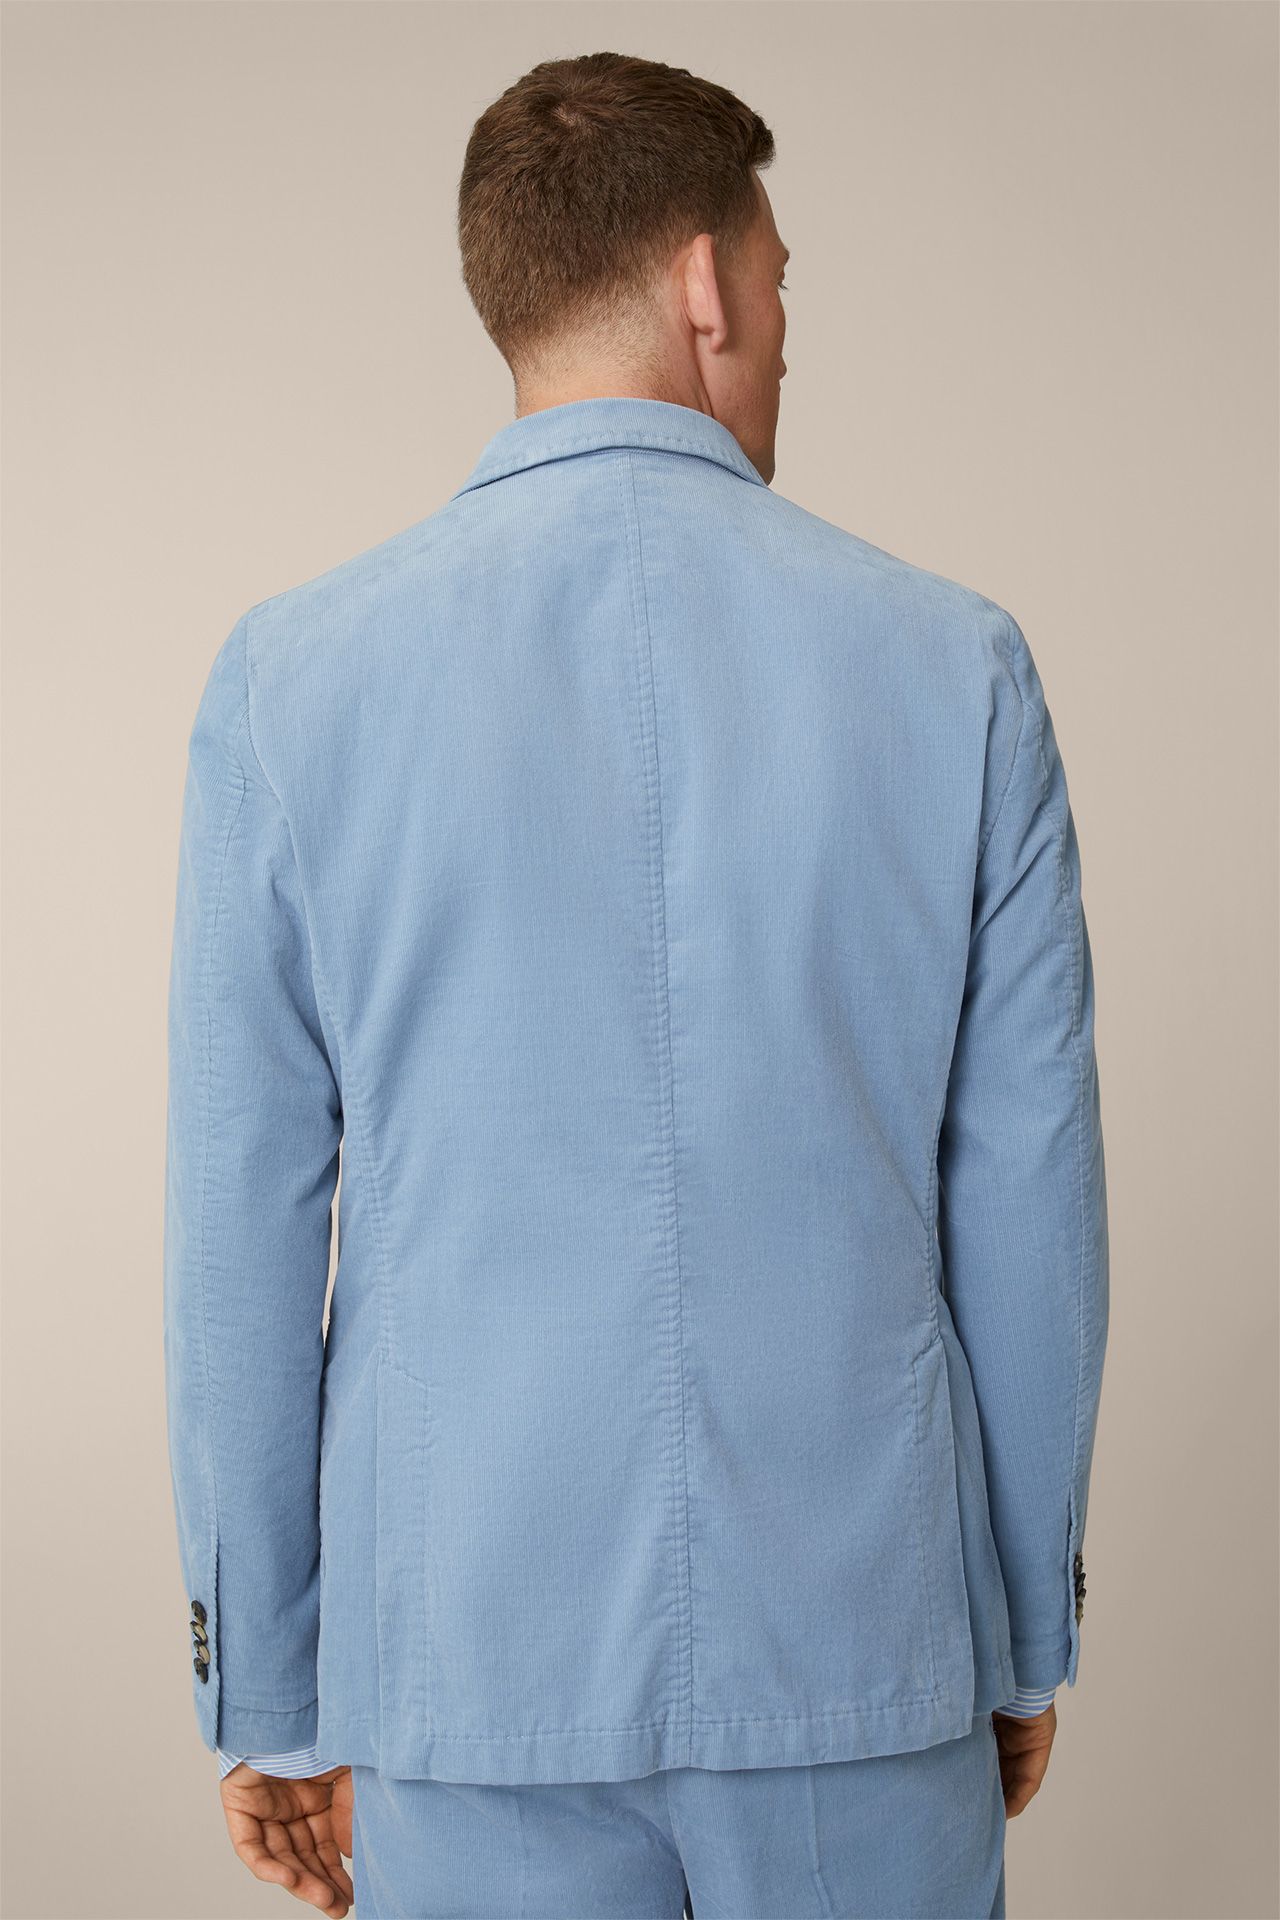 Satino Modular Fine Cord Double-breasted Jacket in Blue